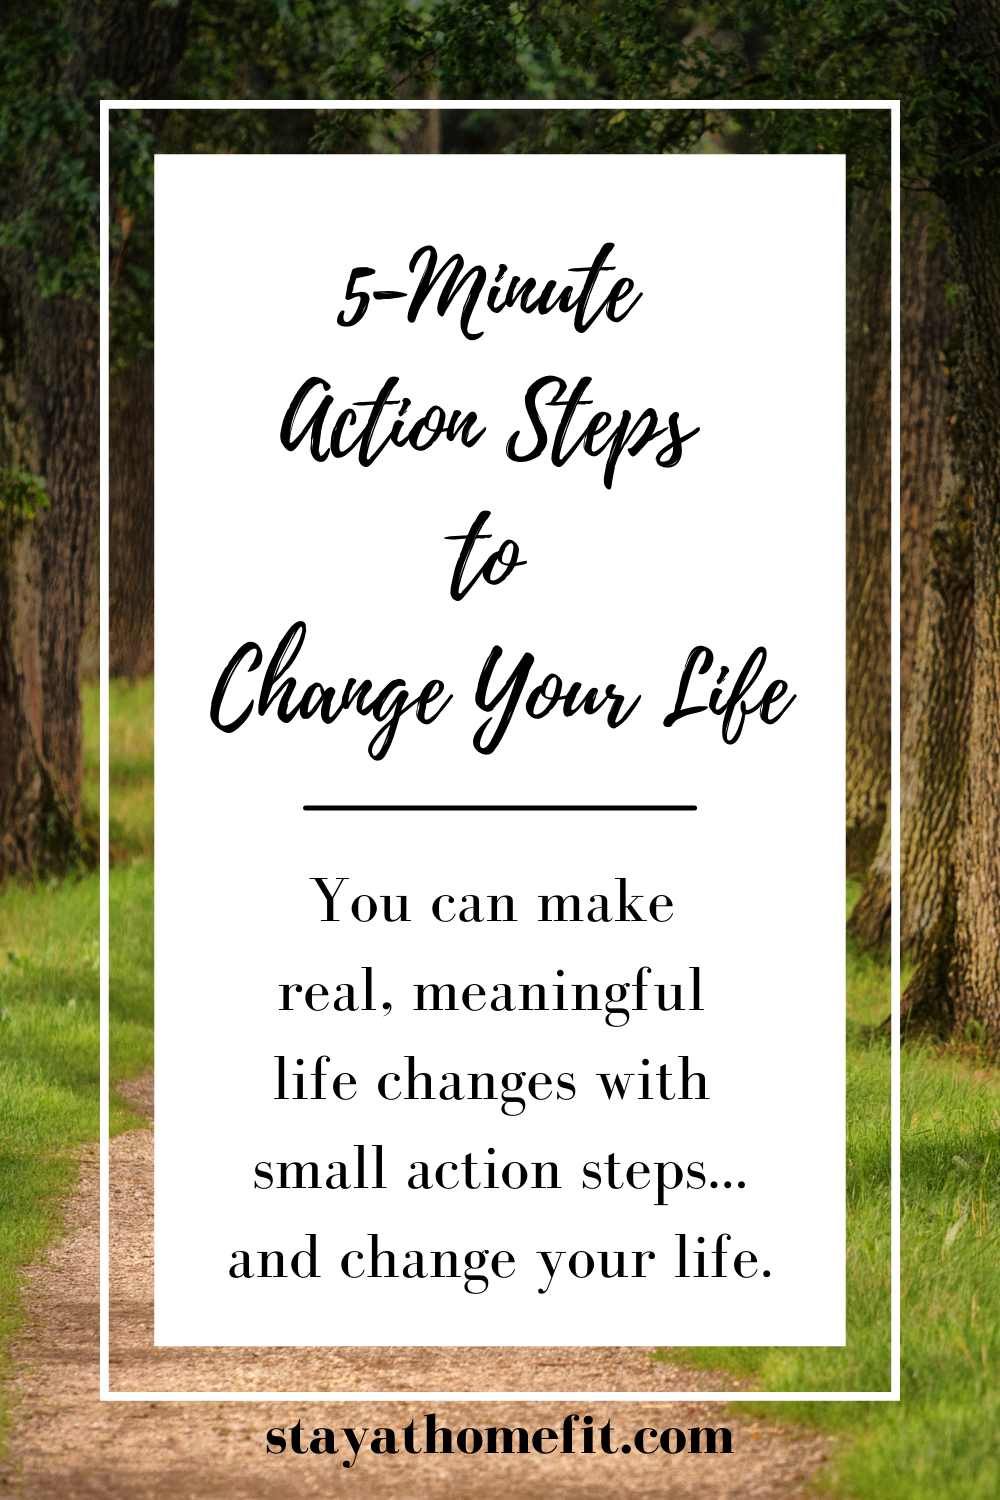 5-Minute Action Steps to Change Your Life